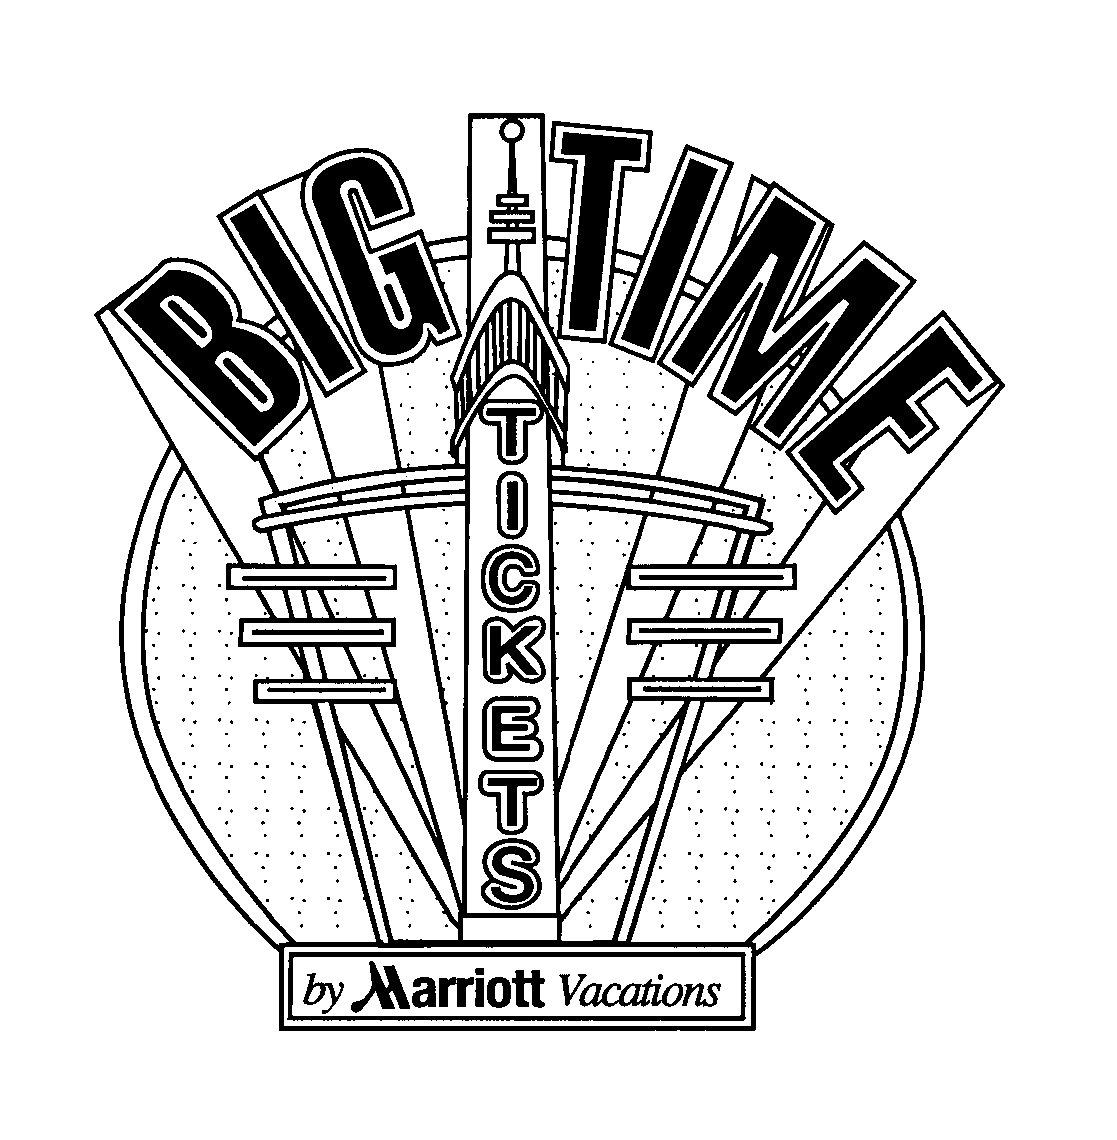  BIG TIME TICKETS BY MARRIOTT VACATIONS